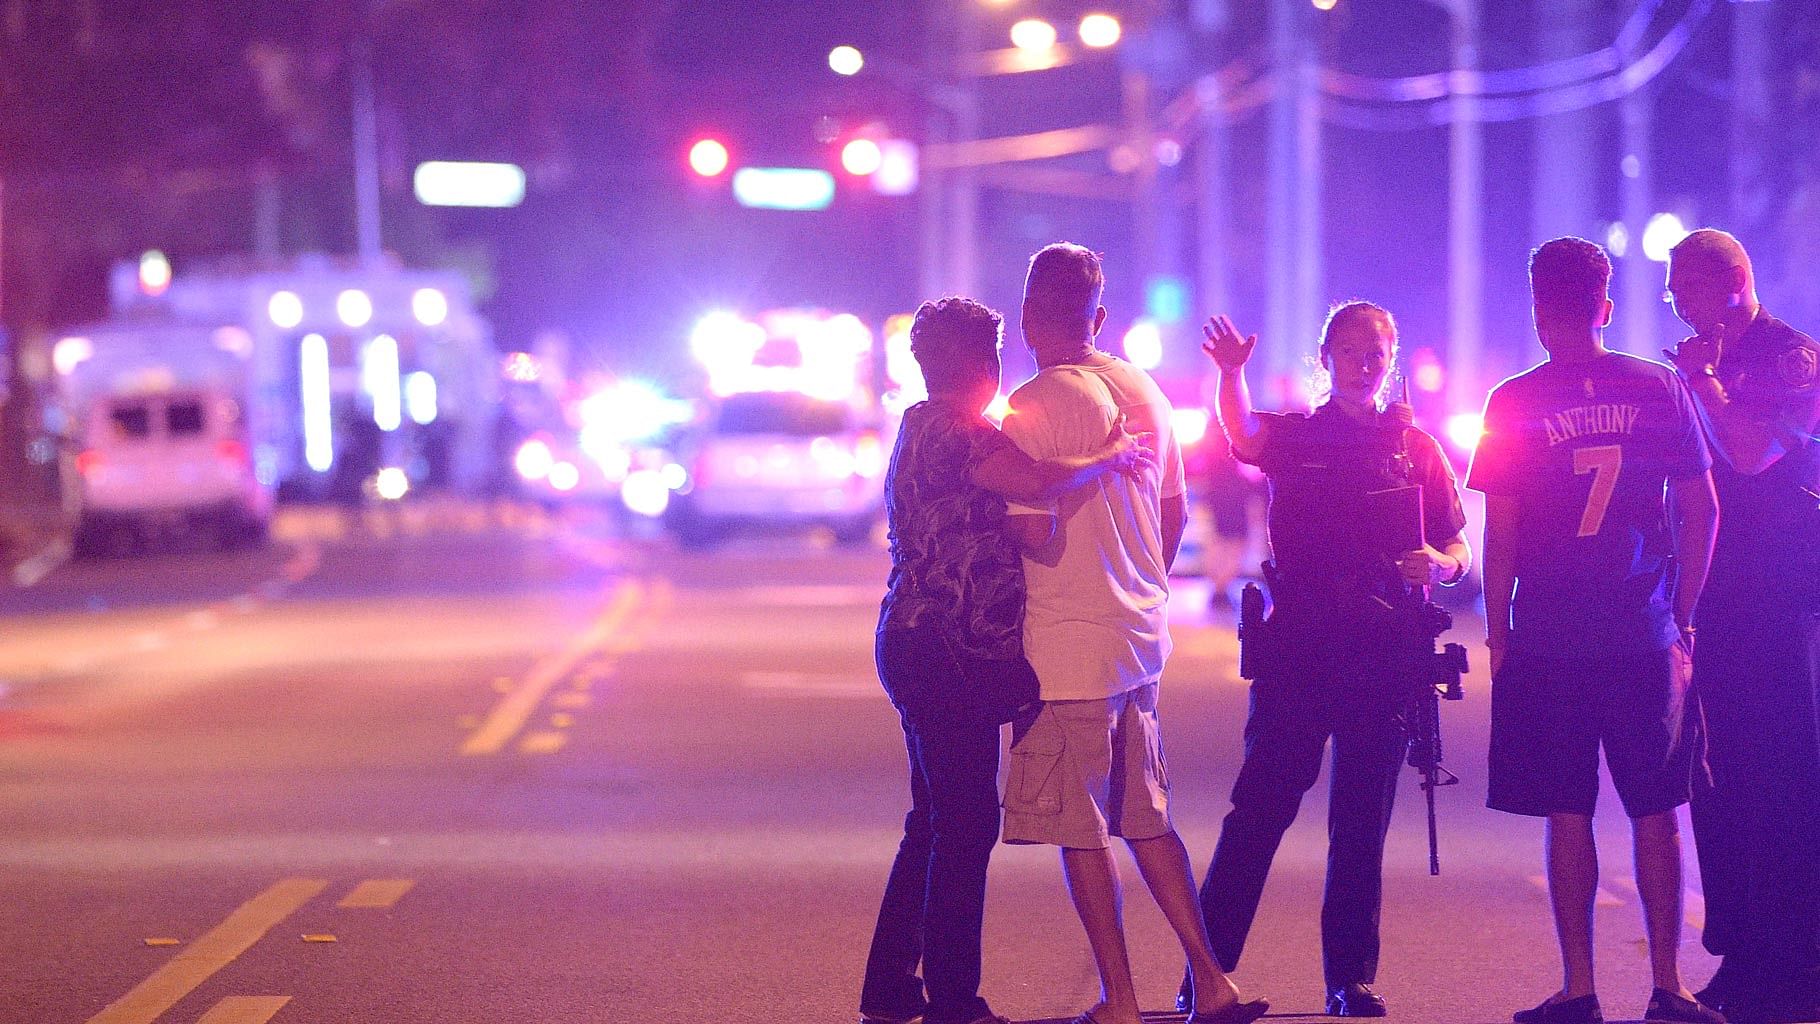 Orlando Police officers direct family members away from a multiple shooting at a nightclub in Orlando. (Photo: AP)